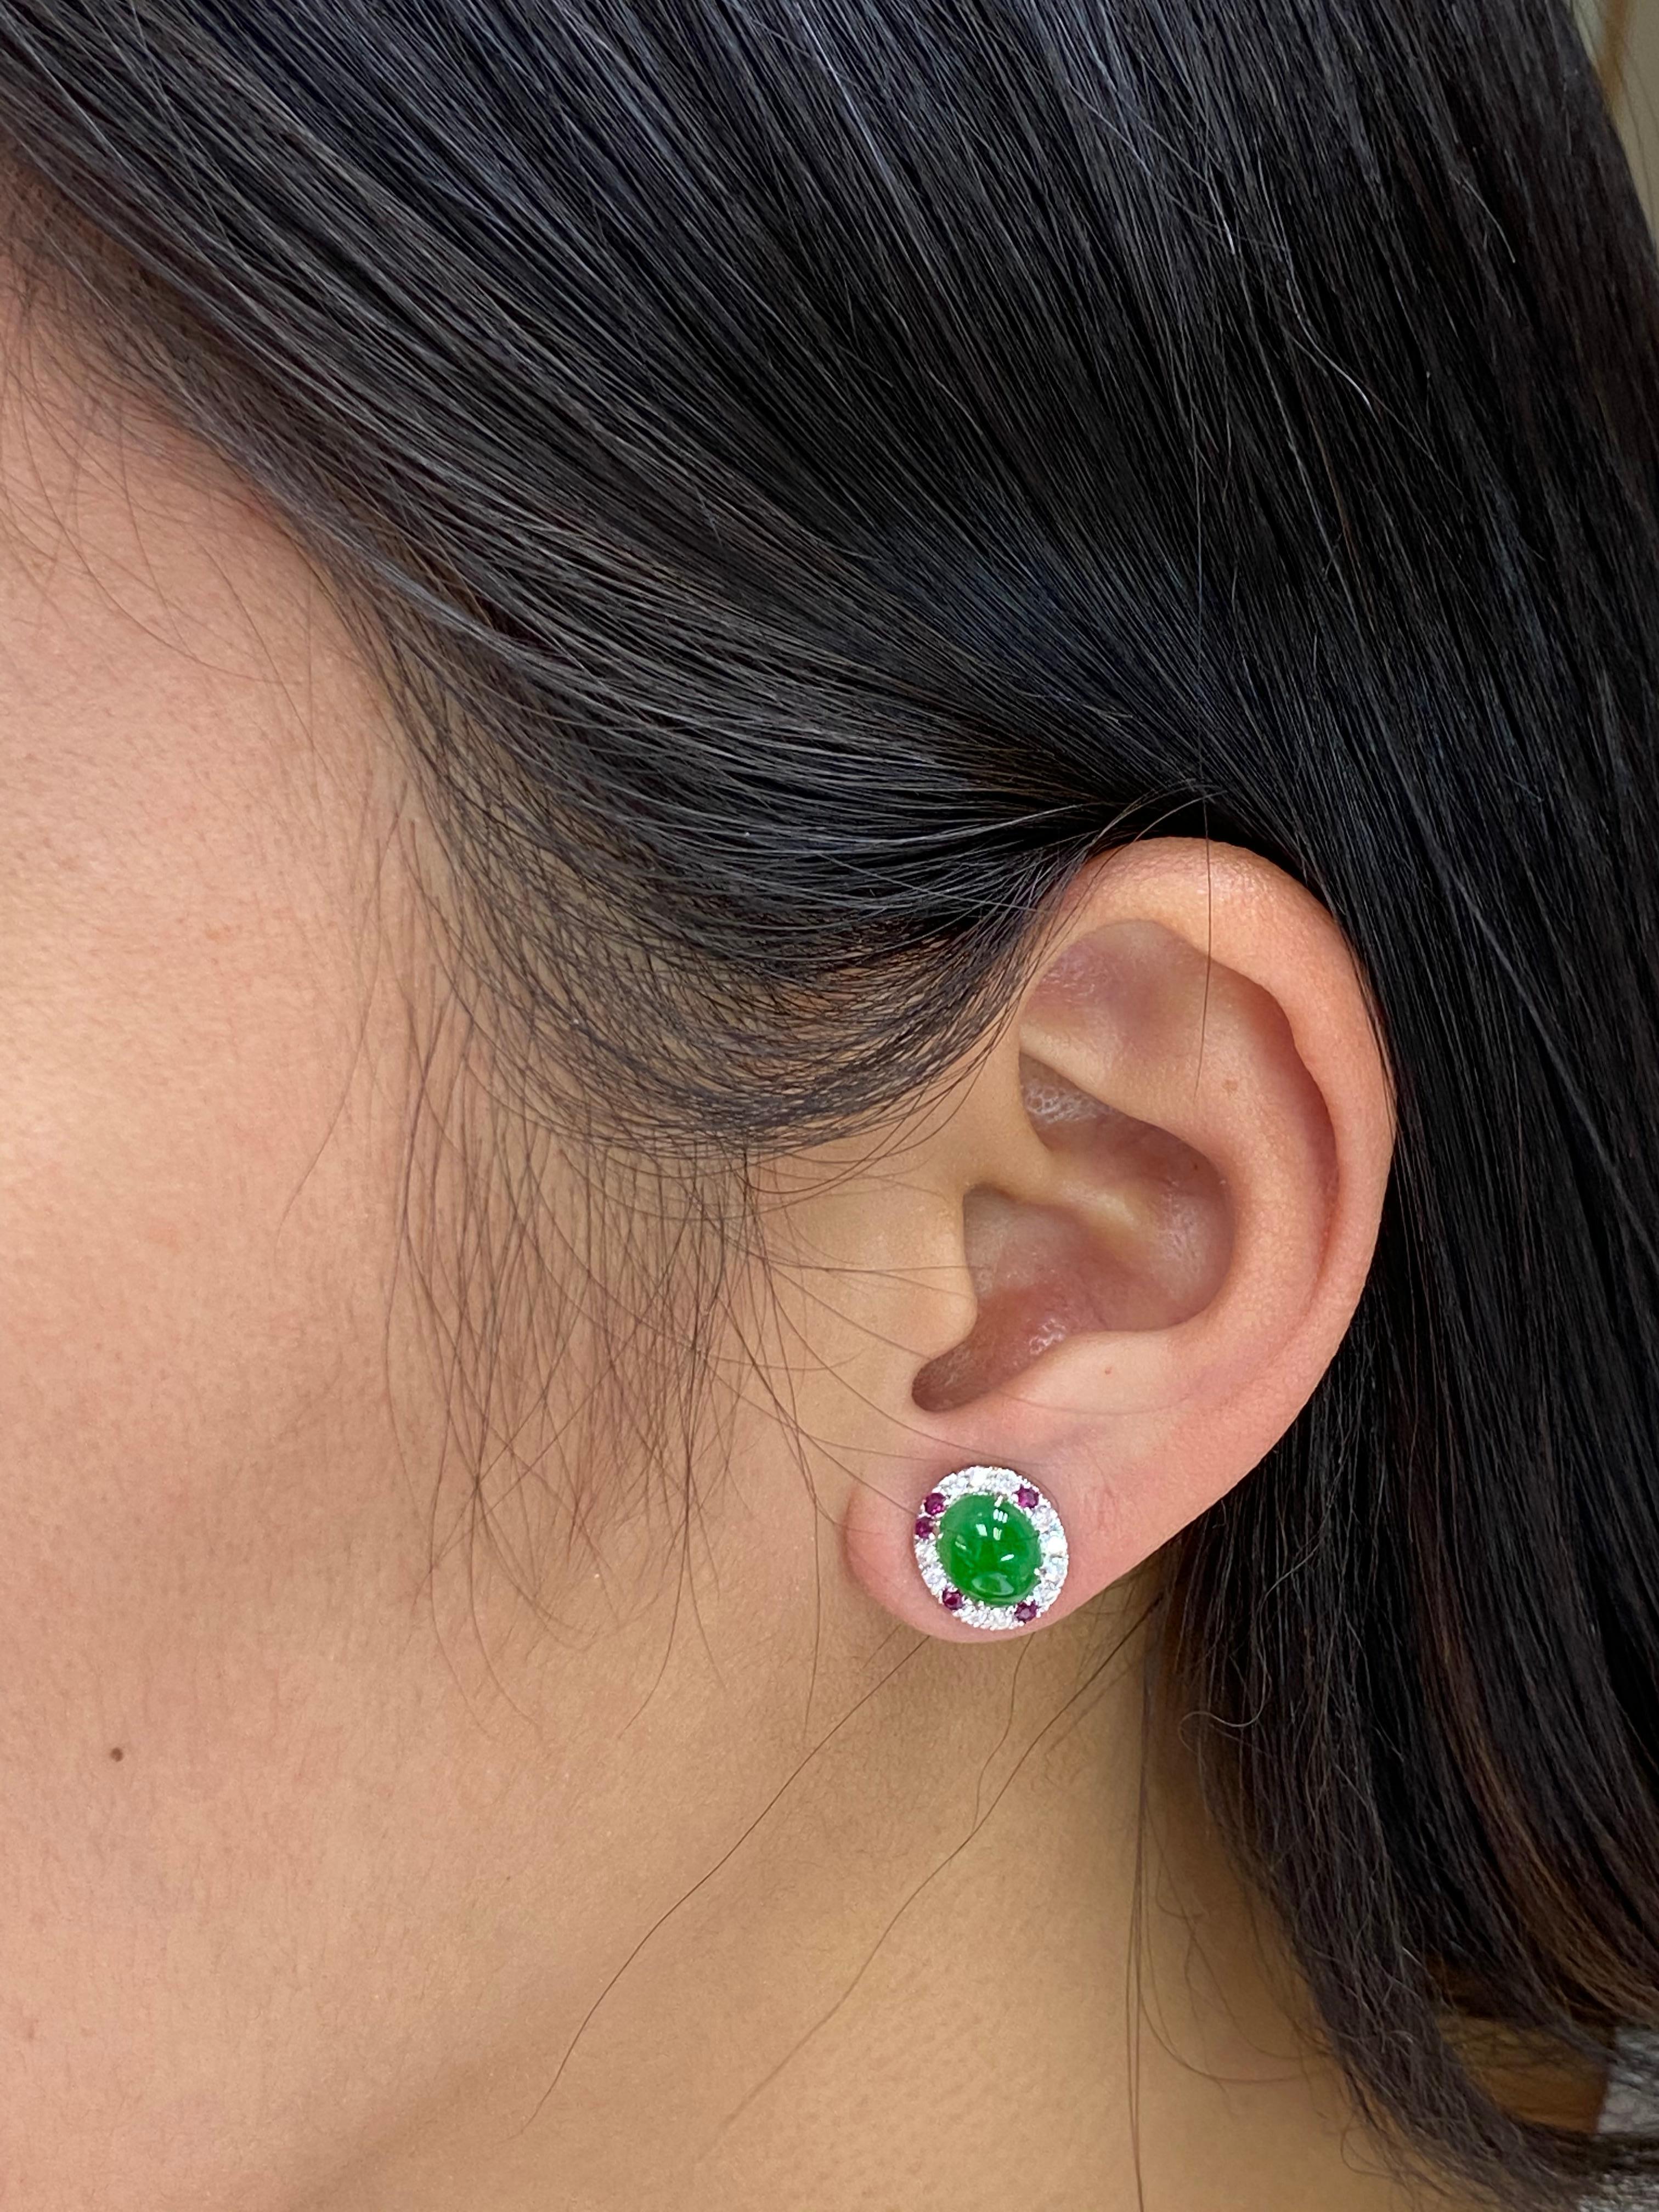 Here is a nice pair of apple green Jadeite Jade earrings. The earrings are about 11.8x 10.5mm each. The earrings are set in 18k white gold, Burma rubies and white diamonds. The 2 jade cabochons are 2.98Cts in total. There are 10 Burma rubies